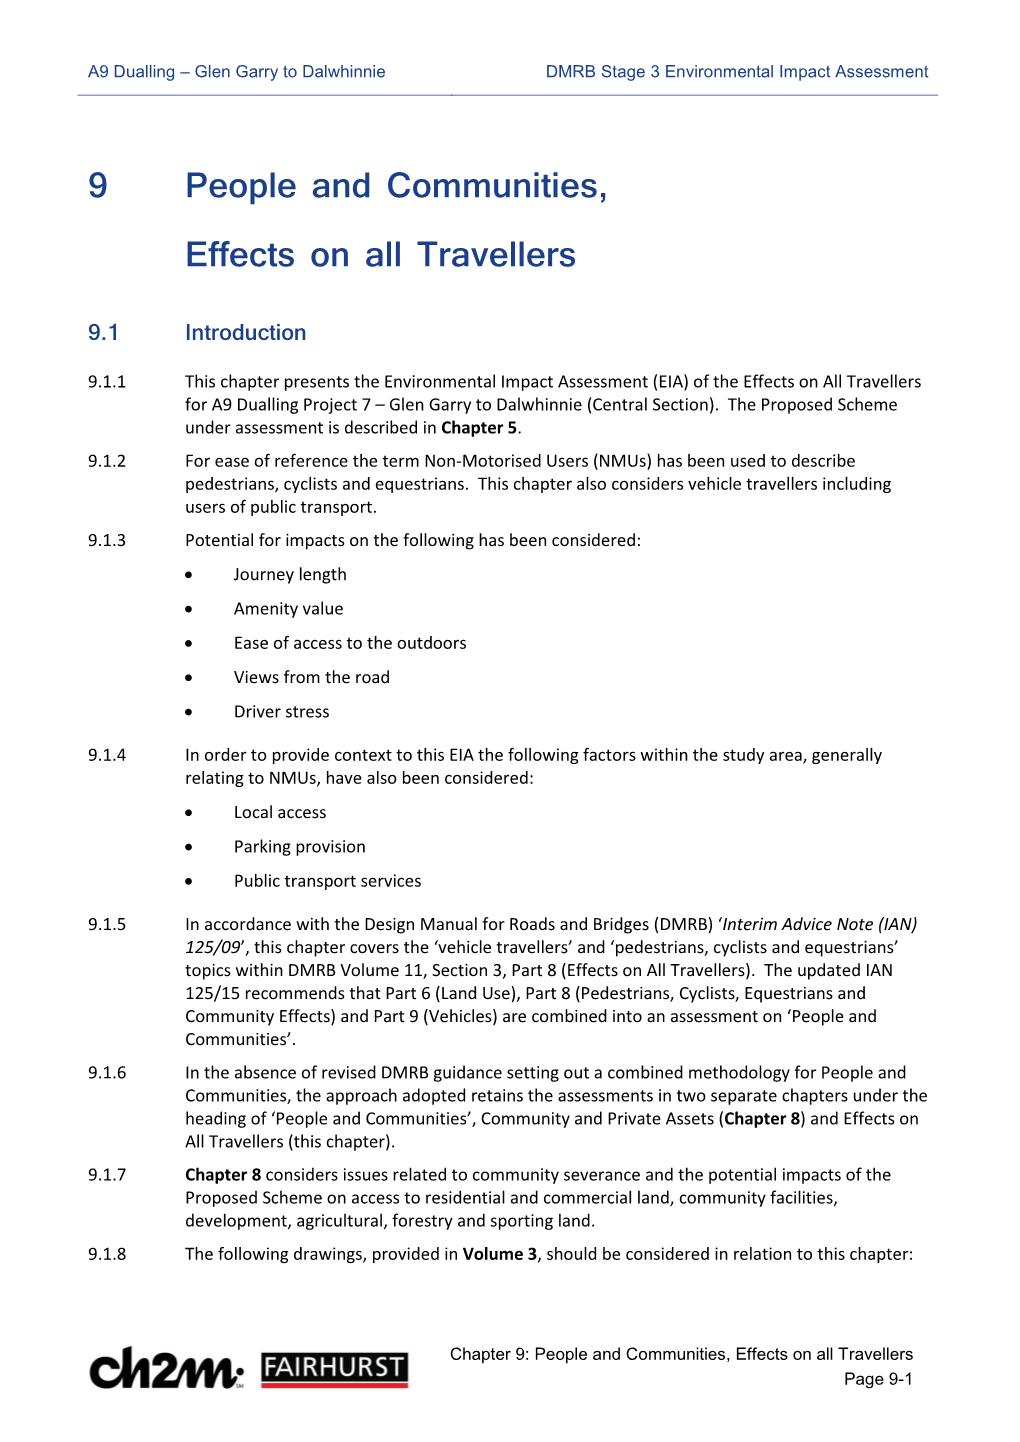 9 People and Communities, Effects on All Travellers